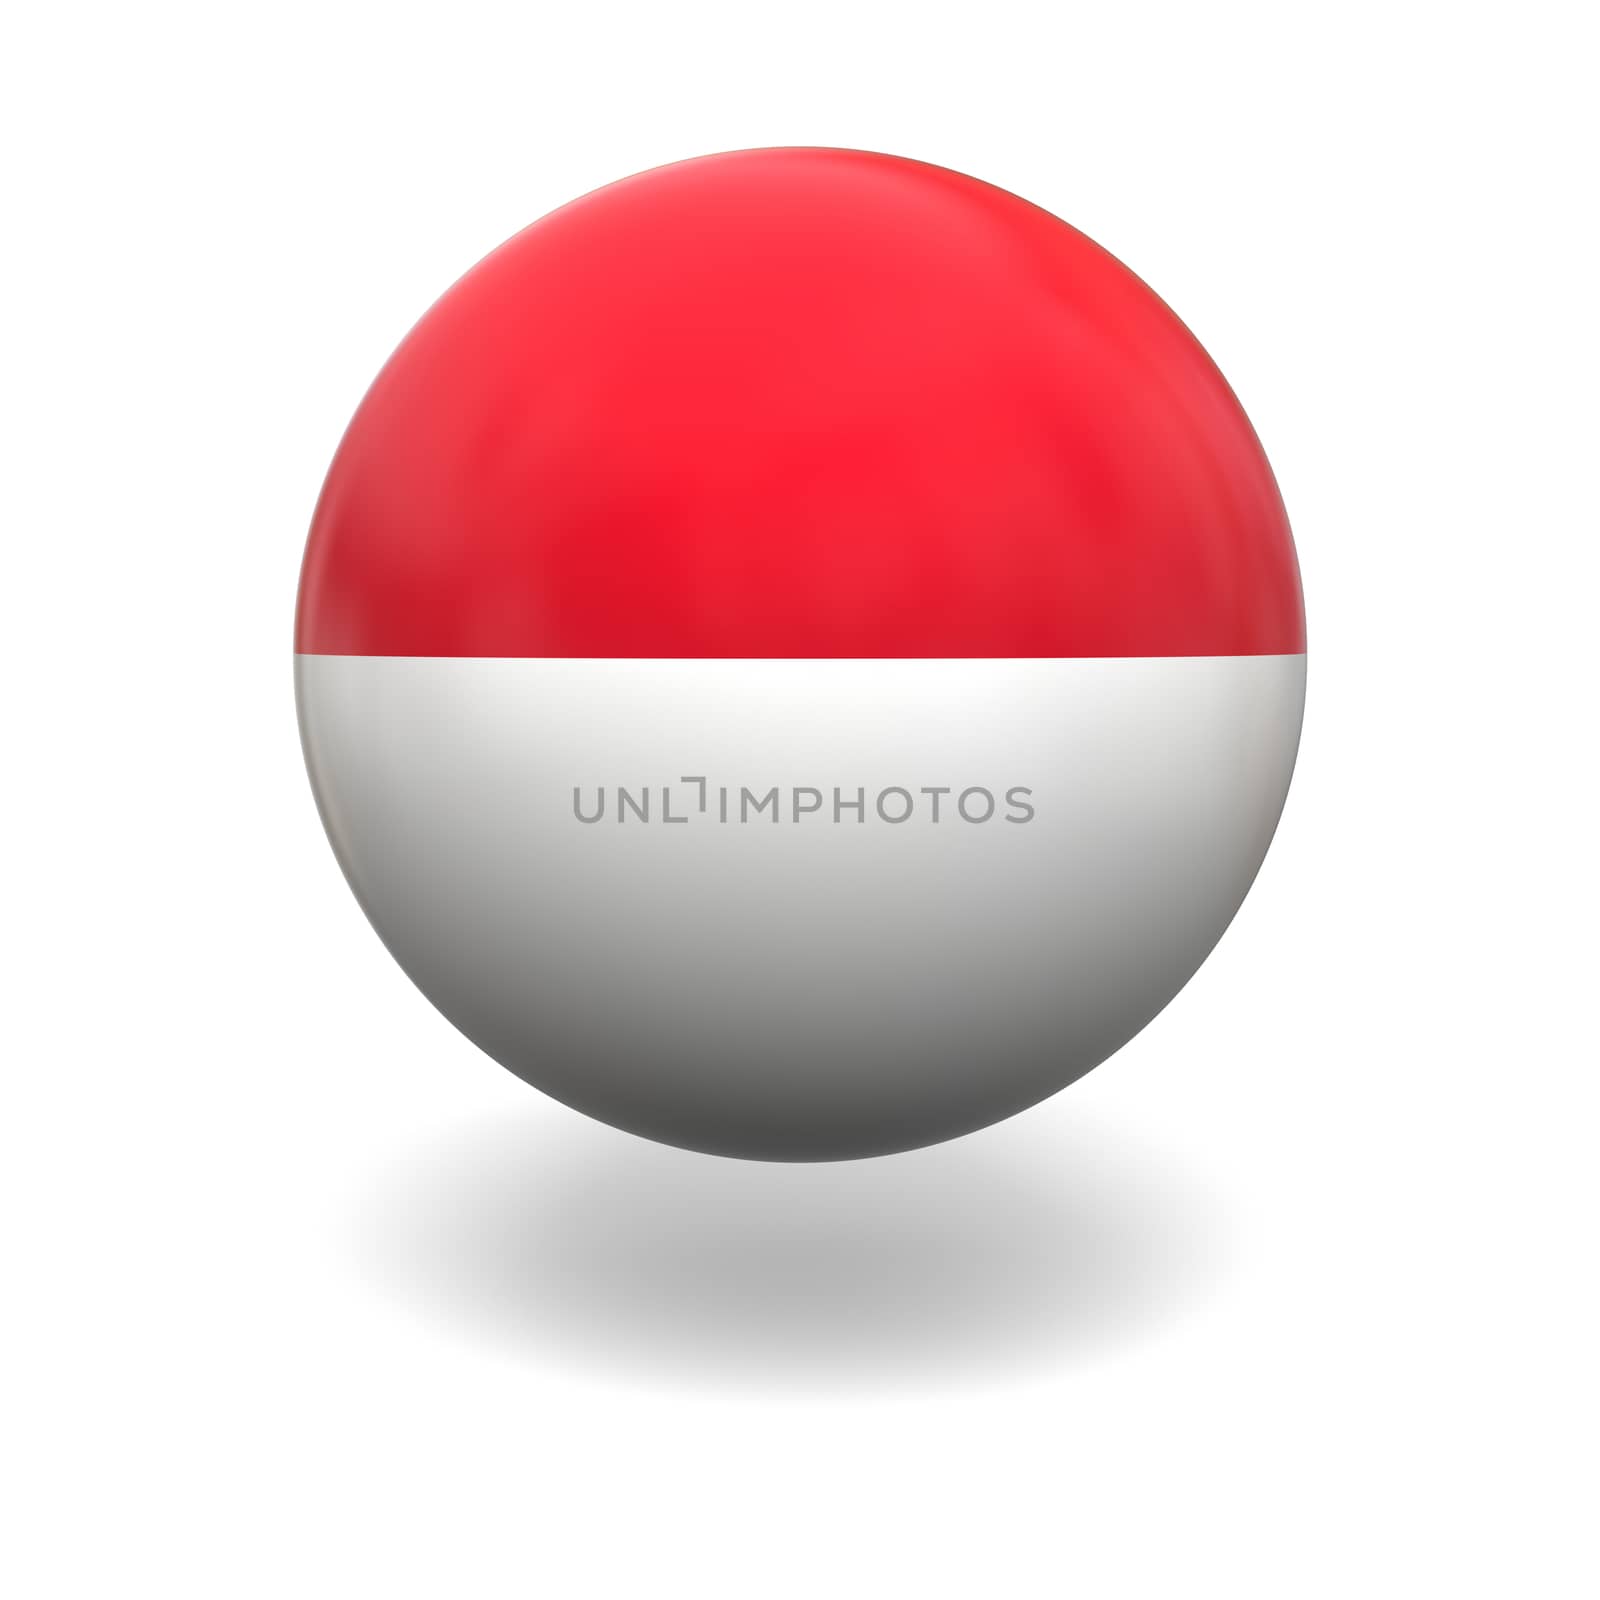 Indonesian flag by Harvepino